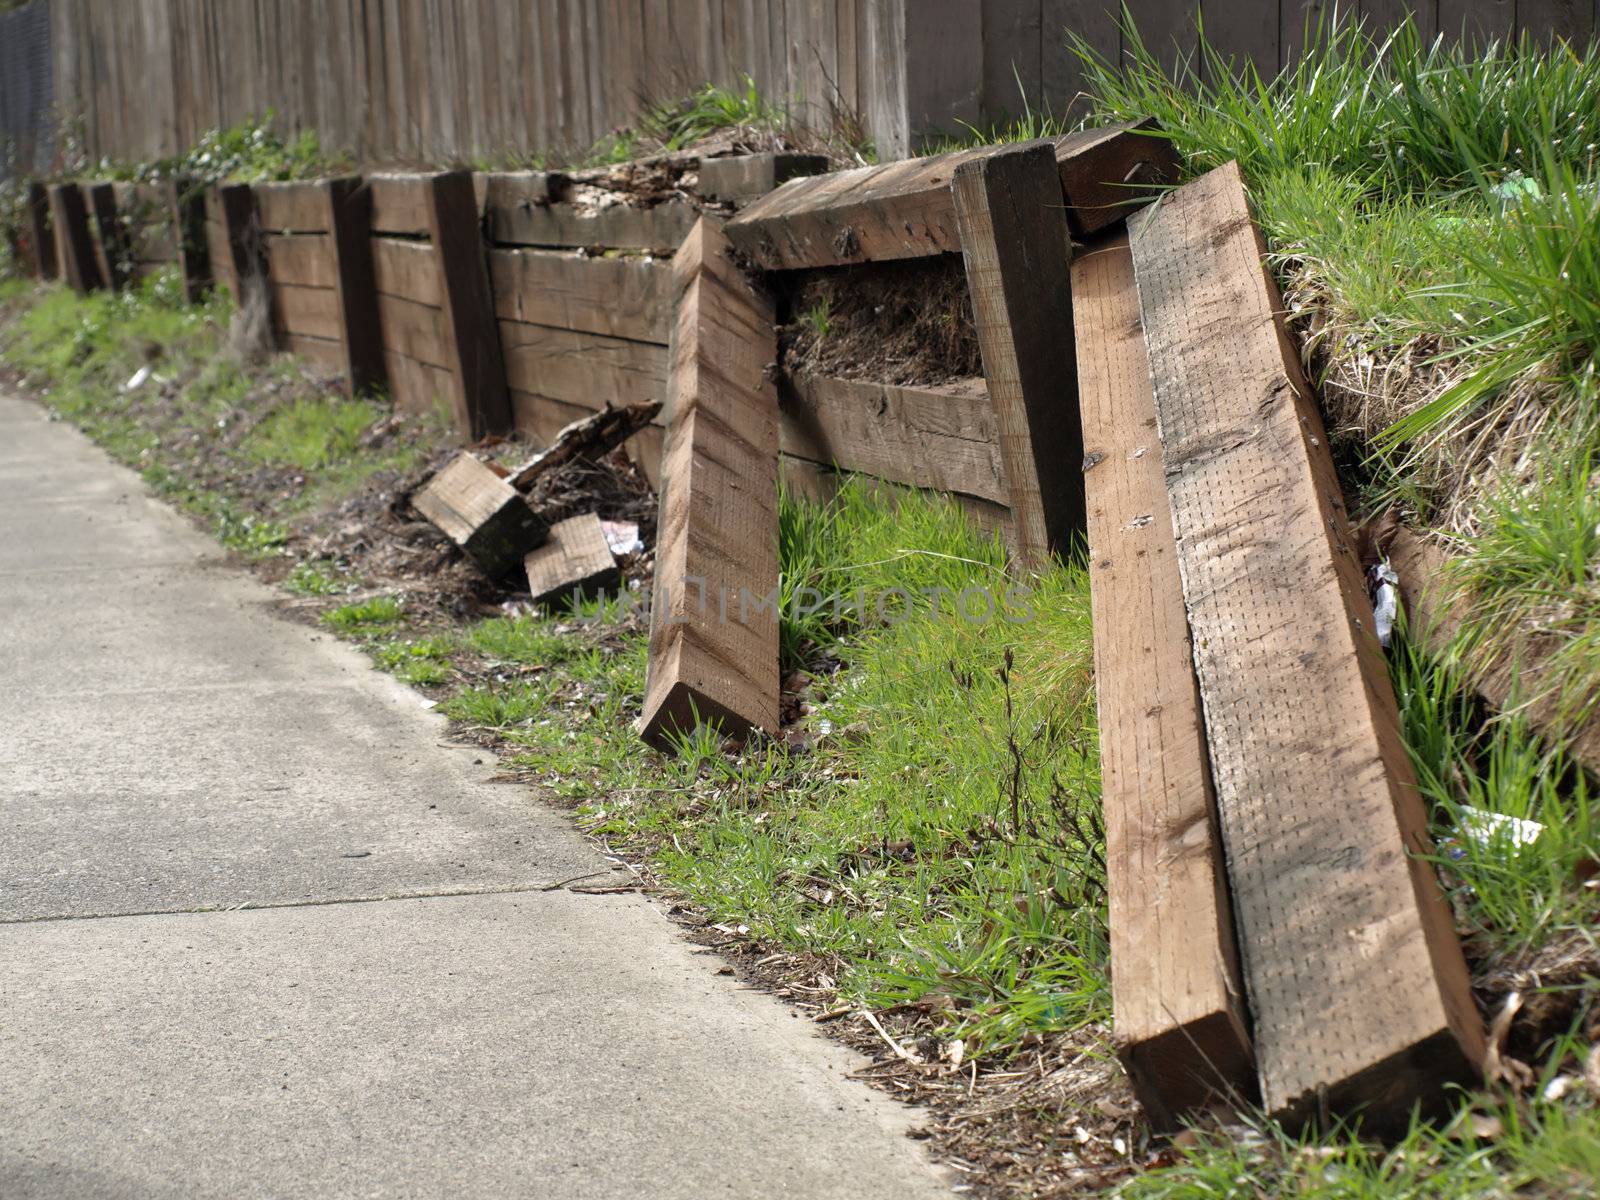 A retaining wall in a vandalized state in need of repair.